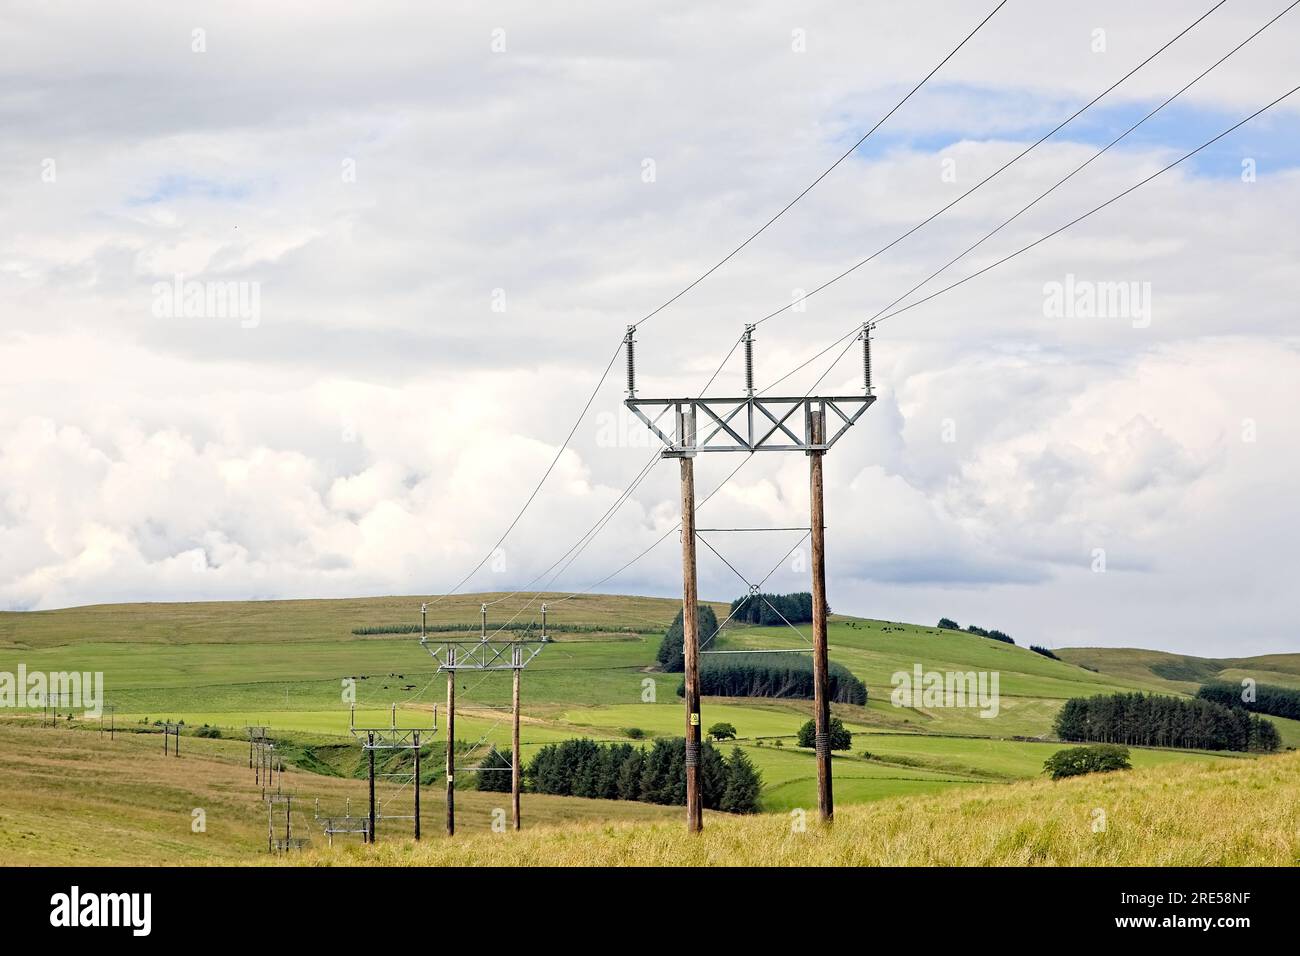 Row of power line cables on wooden polls running across Scottish farm land Stock Photo